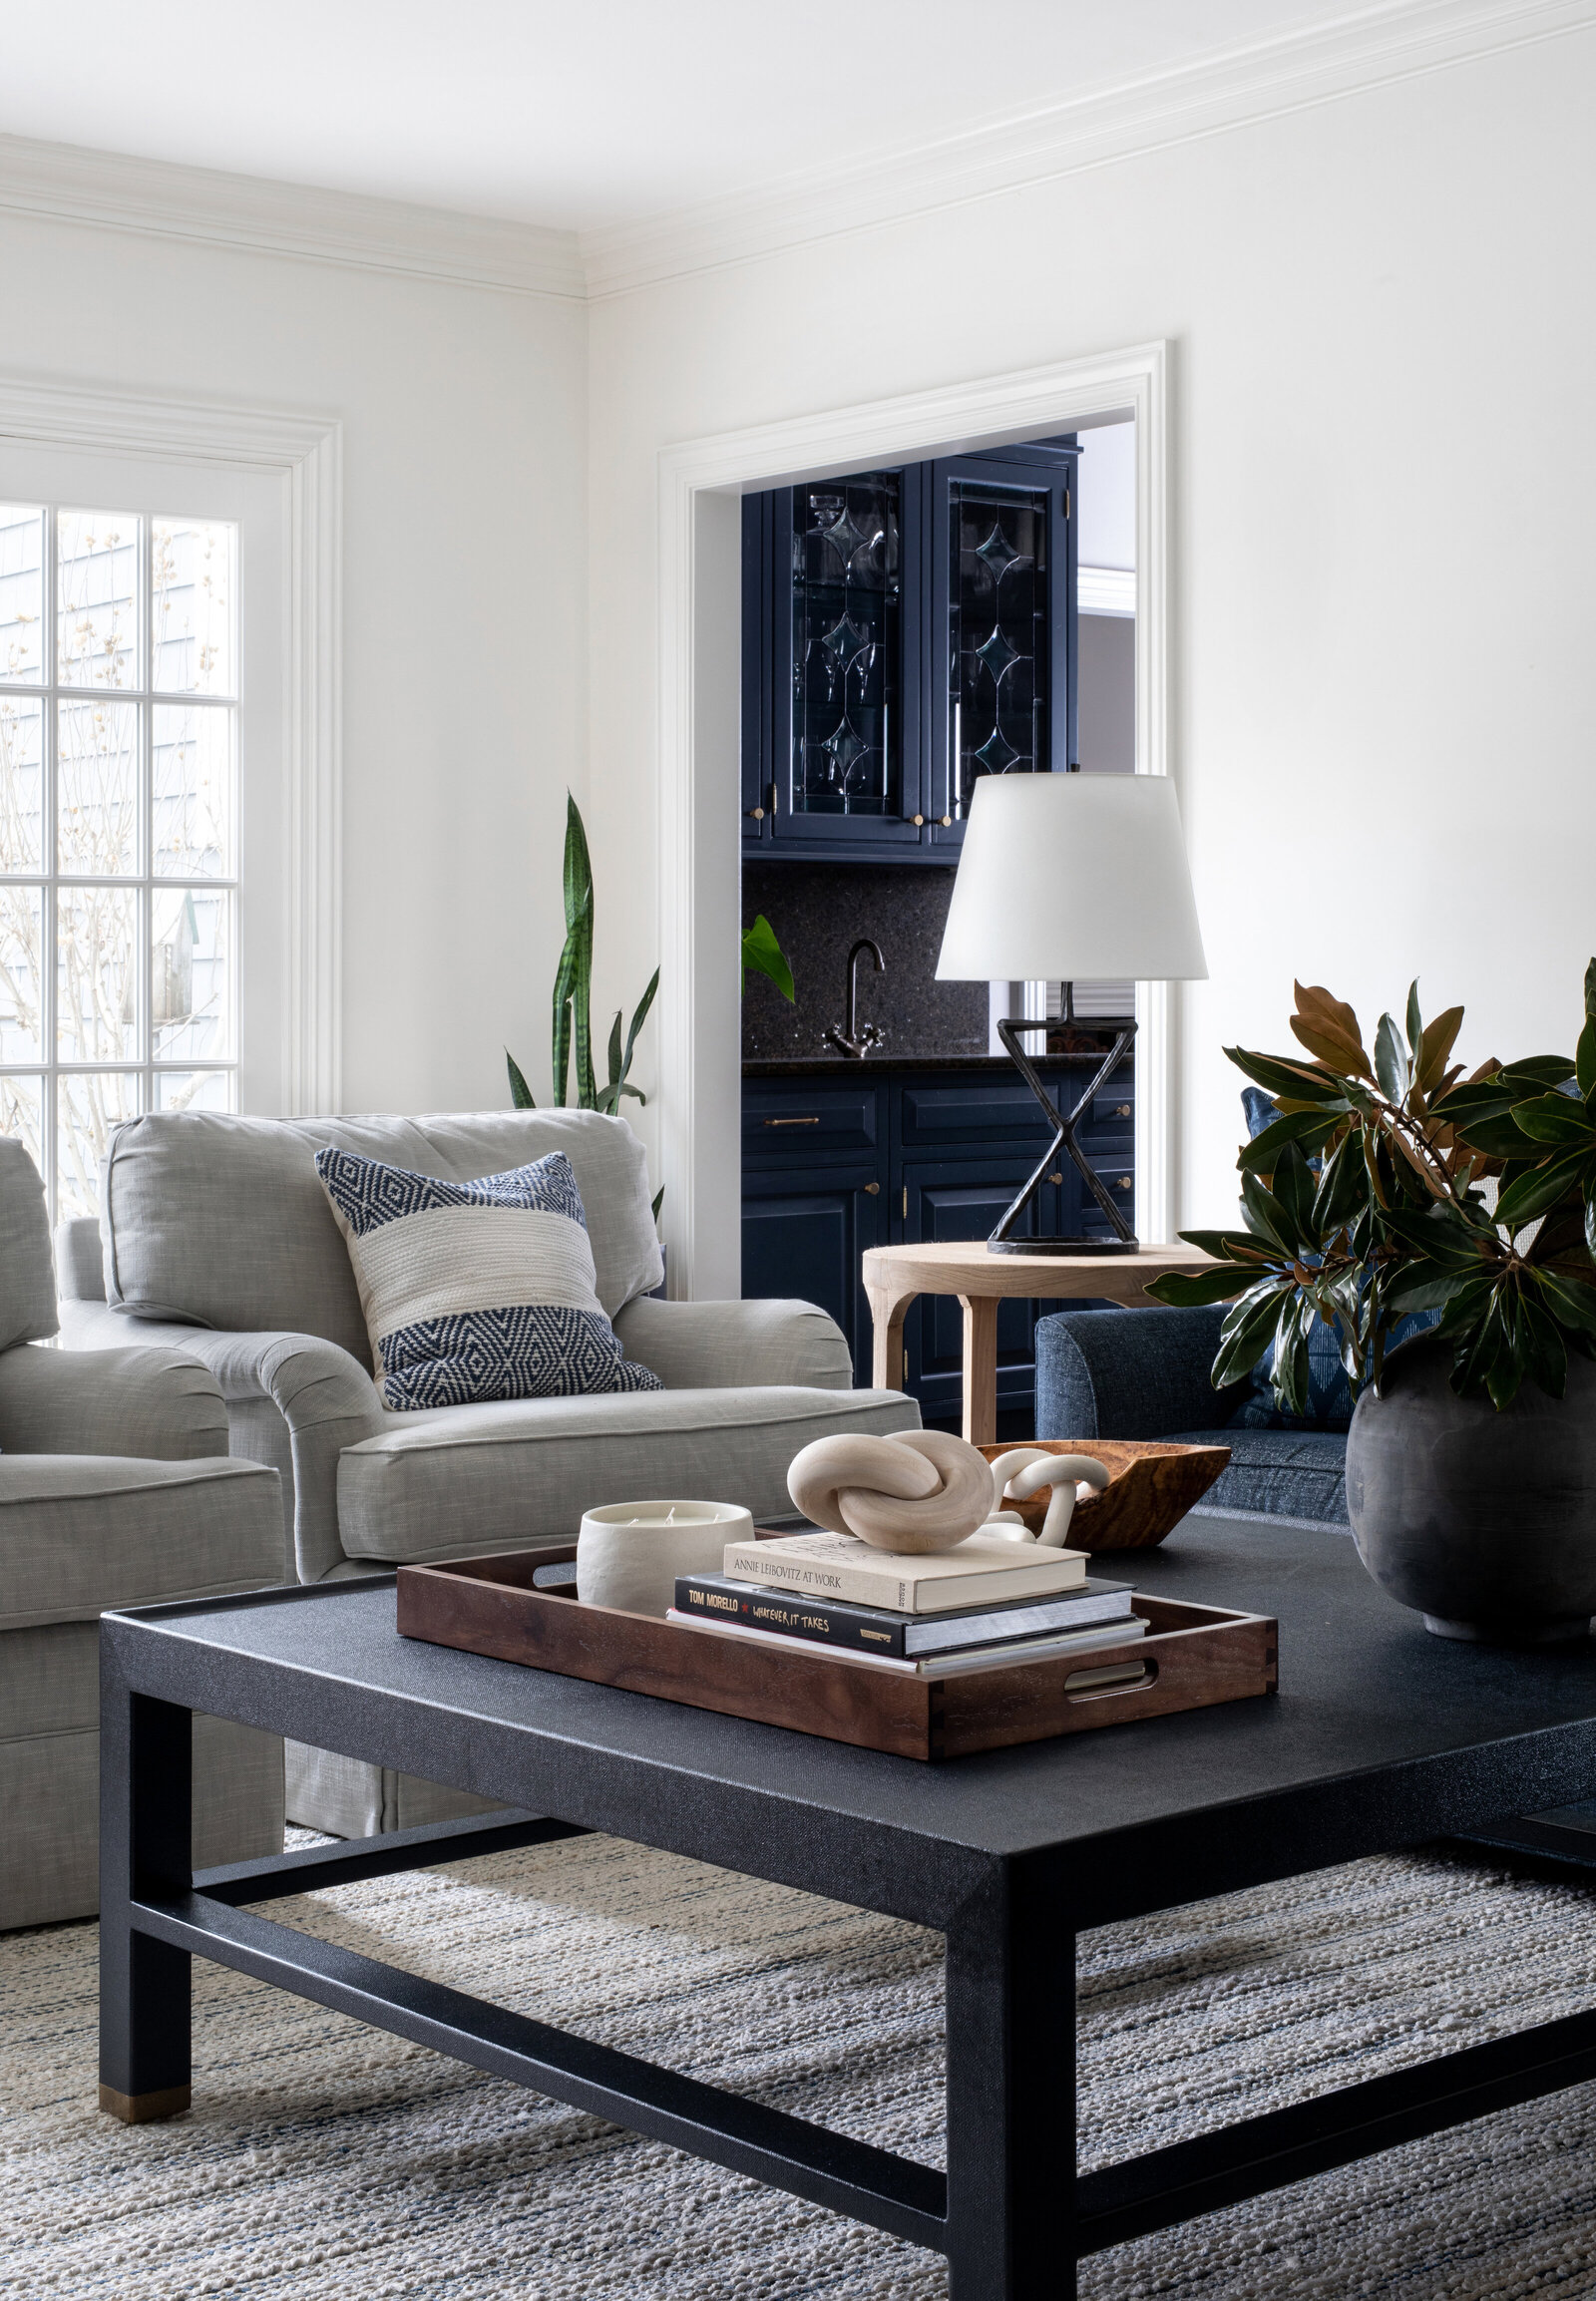 NAVY-COFFEE-TABLE-AND-GRAY-CHAIRS